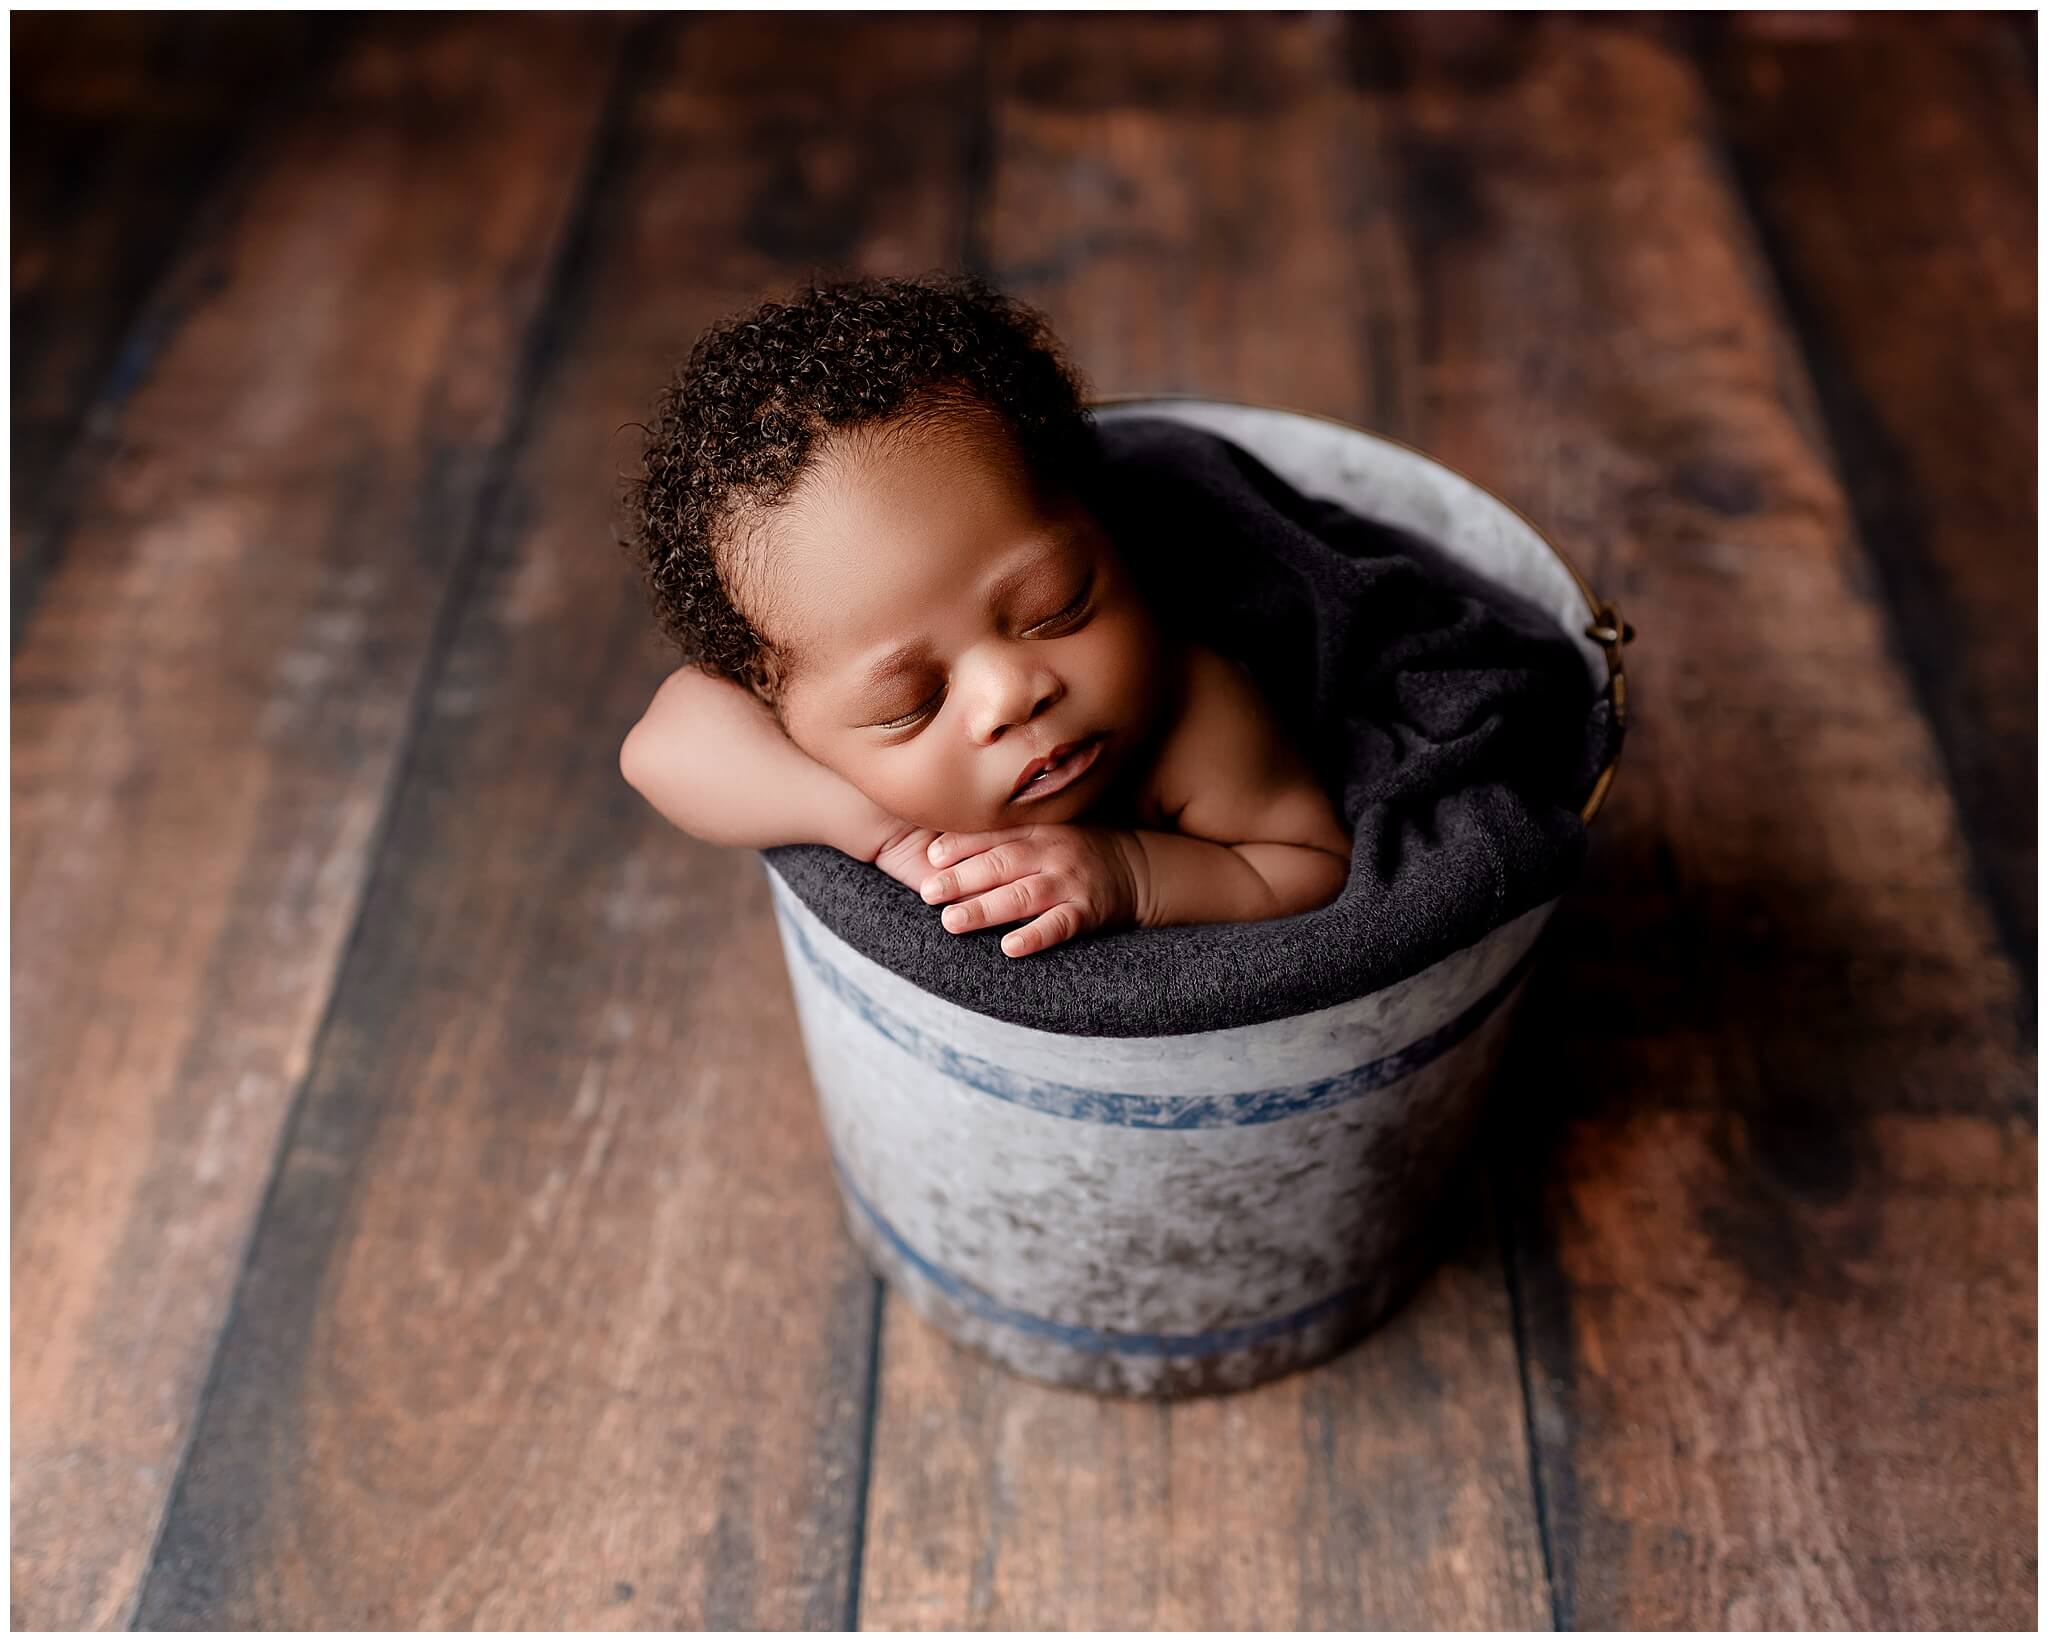 Newborn bucket prop with baby boy sleeping soundly with his head laying peacefully on his arms.